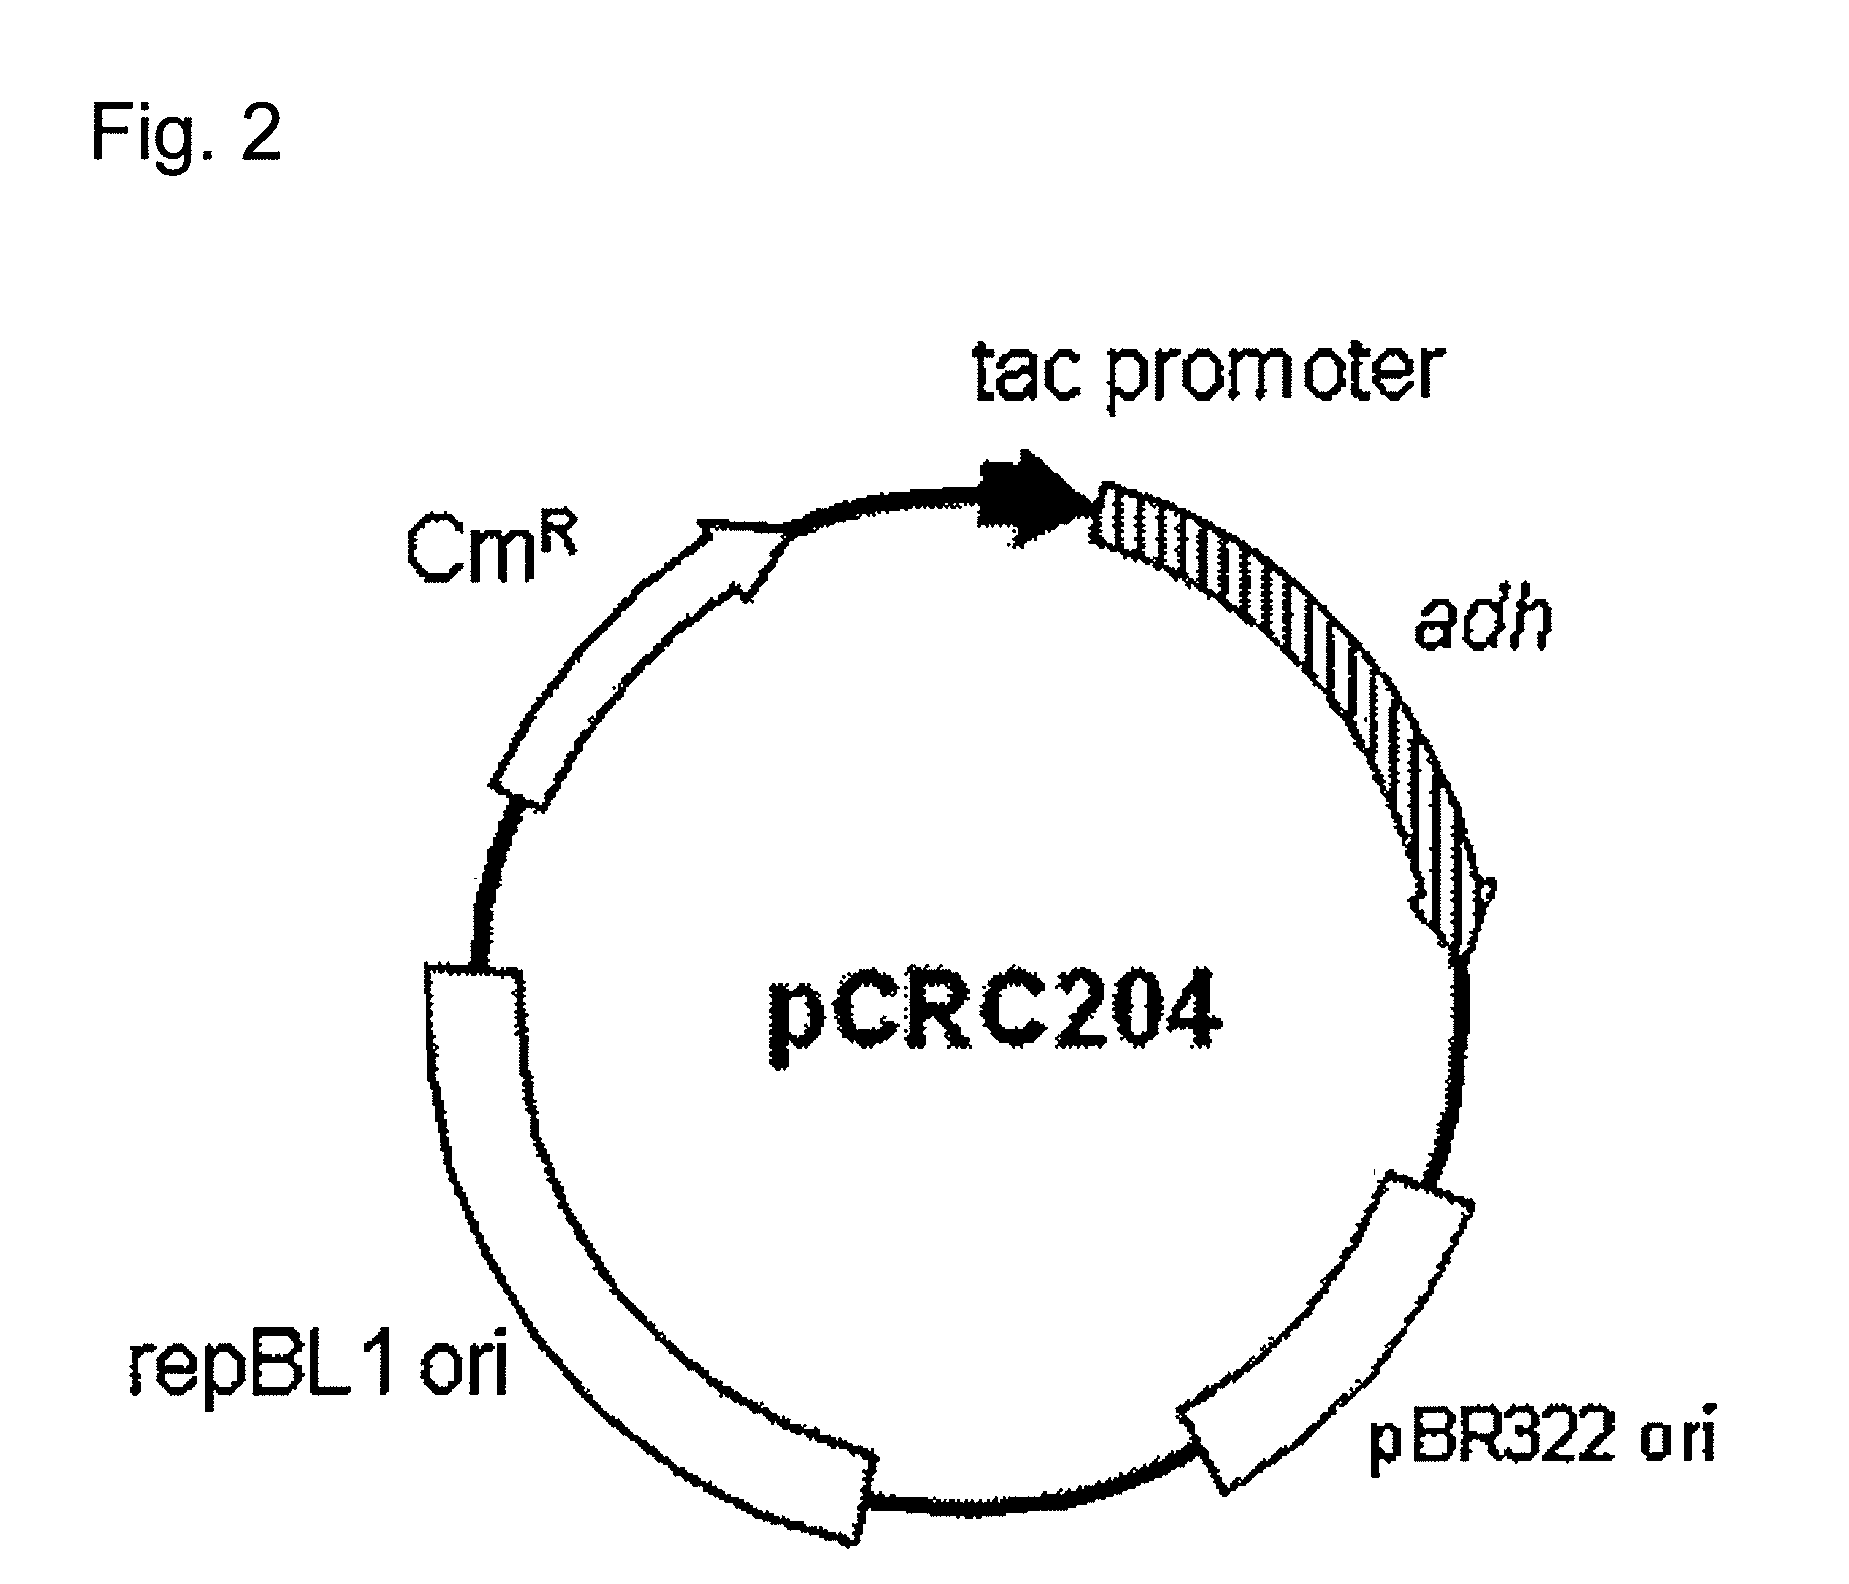 Transformant of coryneform bacteria capable of producing isopropanol